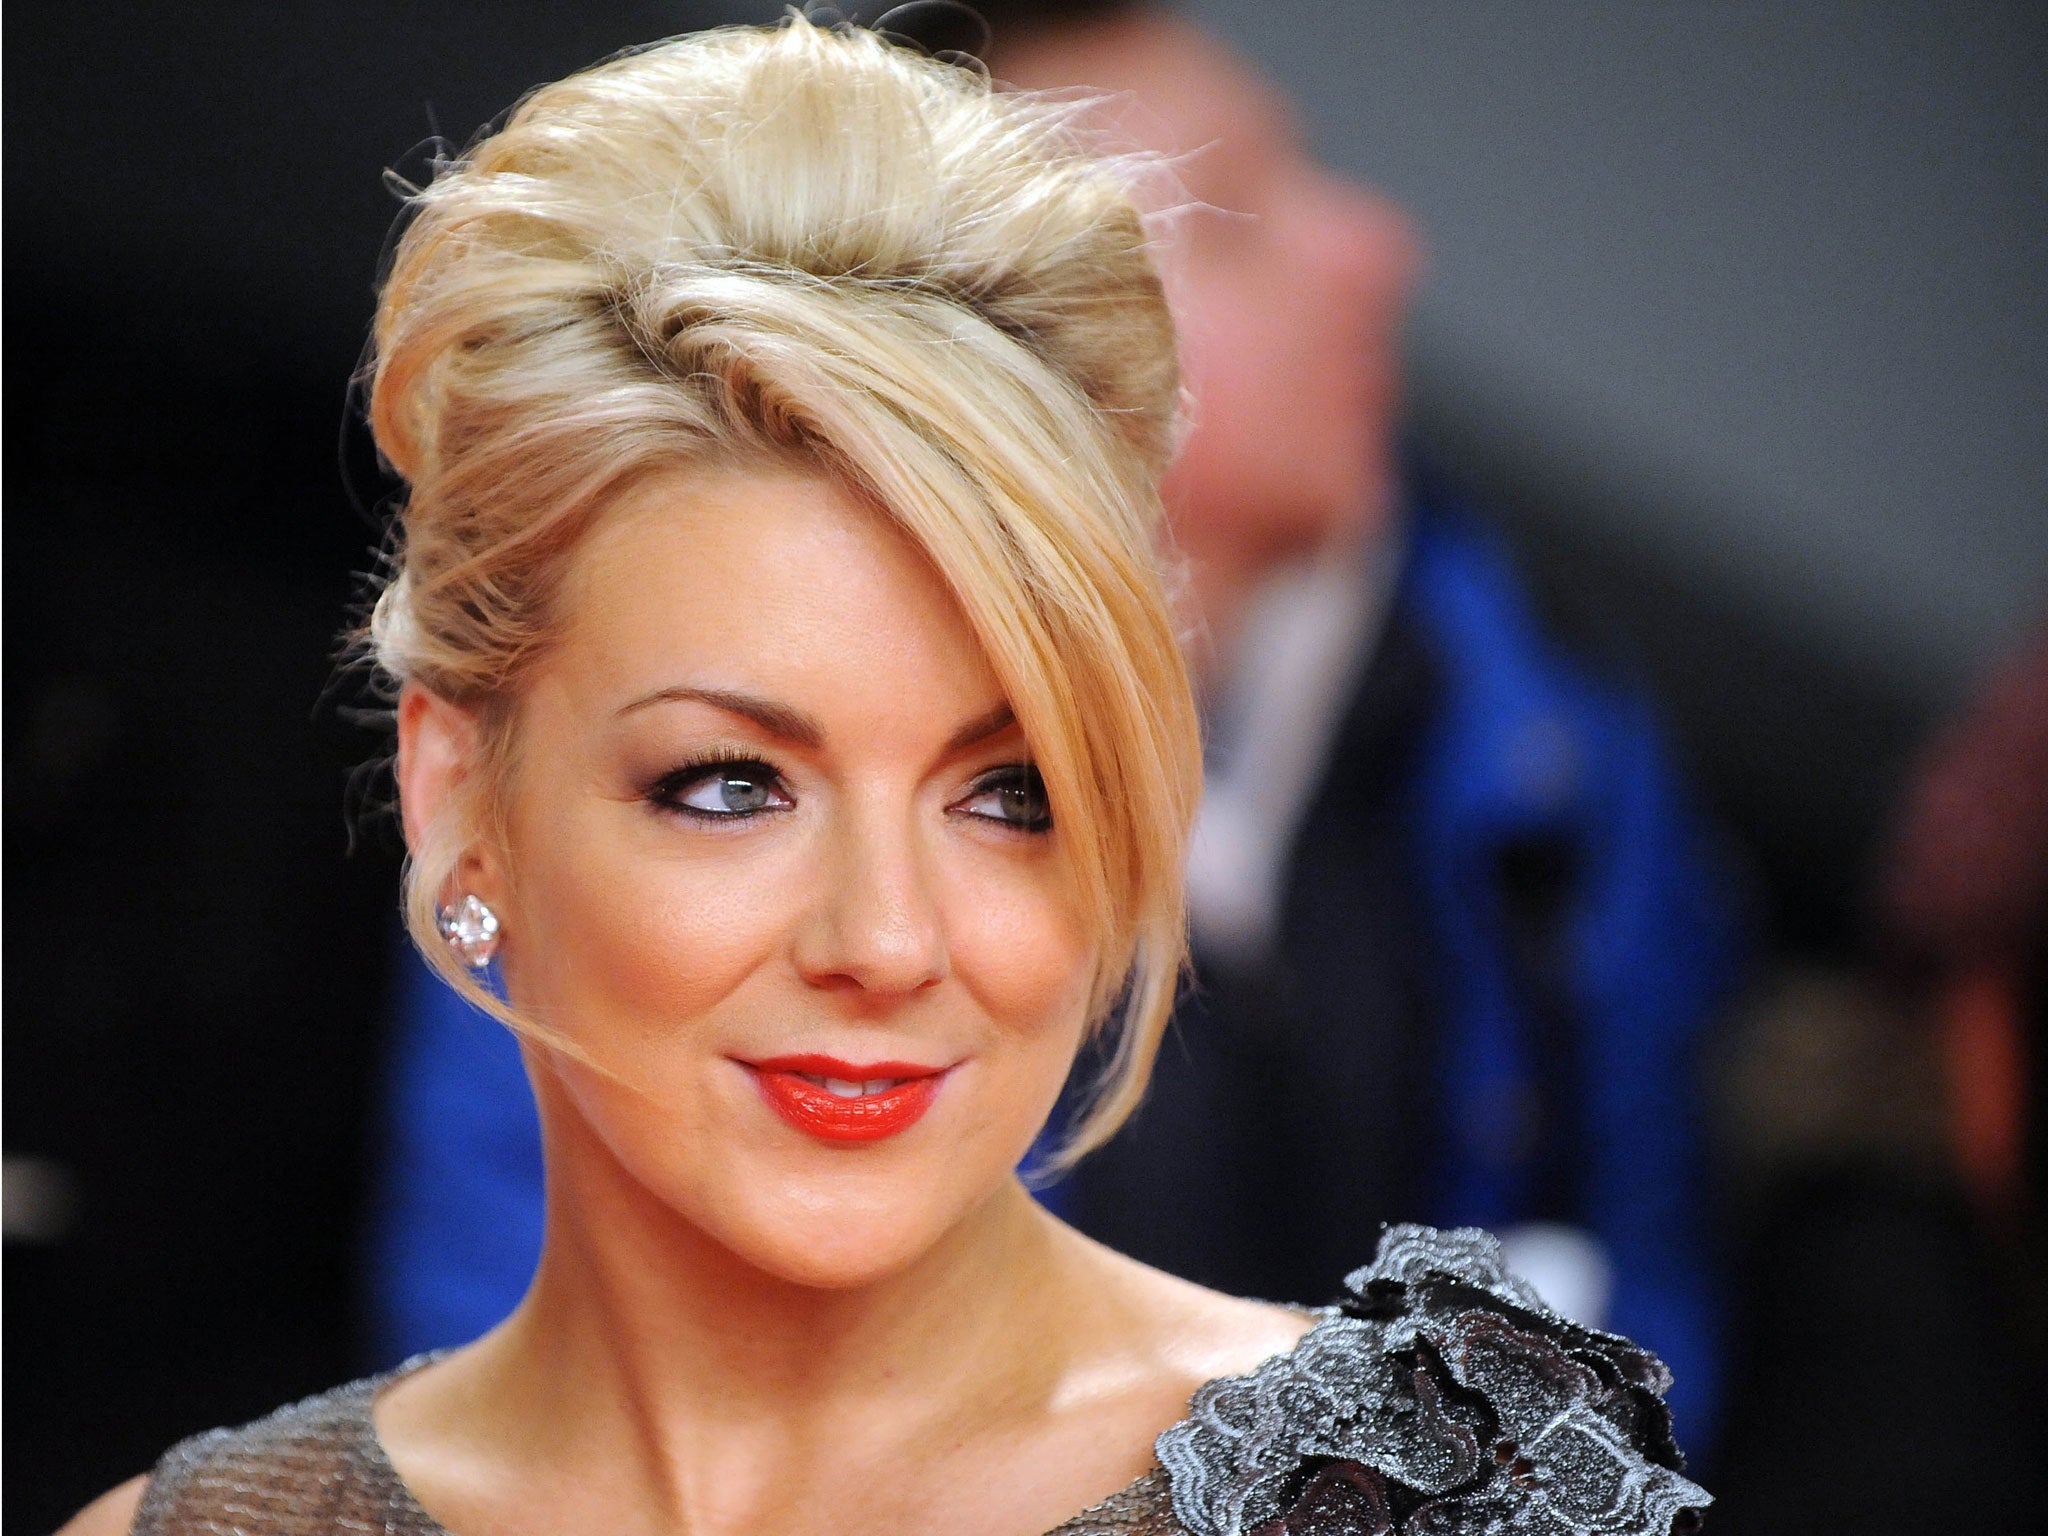 Sheridan Smith has been cast as Cilla Black in a new three-part ITV drama